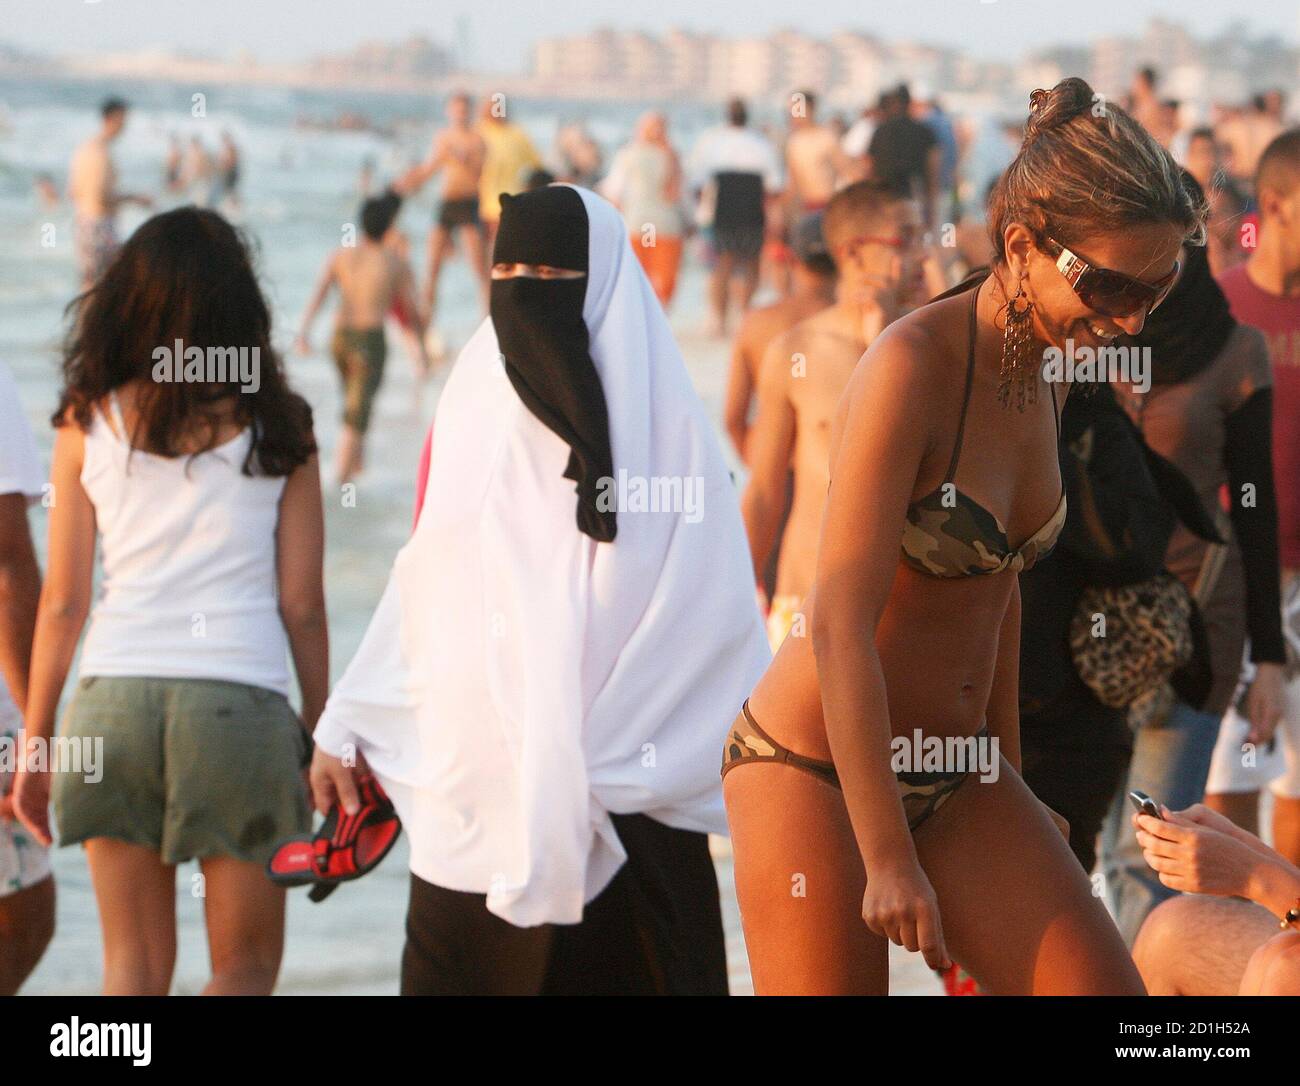 A woman wearing a bikini walks past a woman wearing a niqab on a beach in  the Mediterranean city of Alexandria, about 220 km northwest of Cairo,  August 7, 2009. REUTERS/Asmaa Waguih (